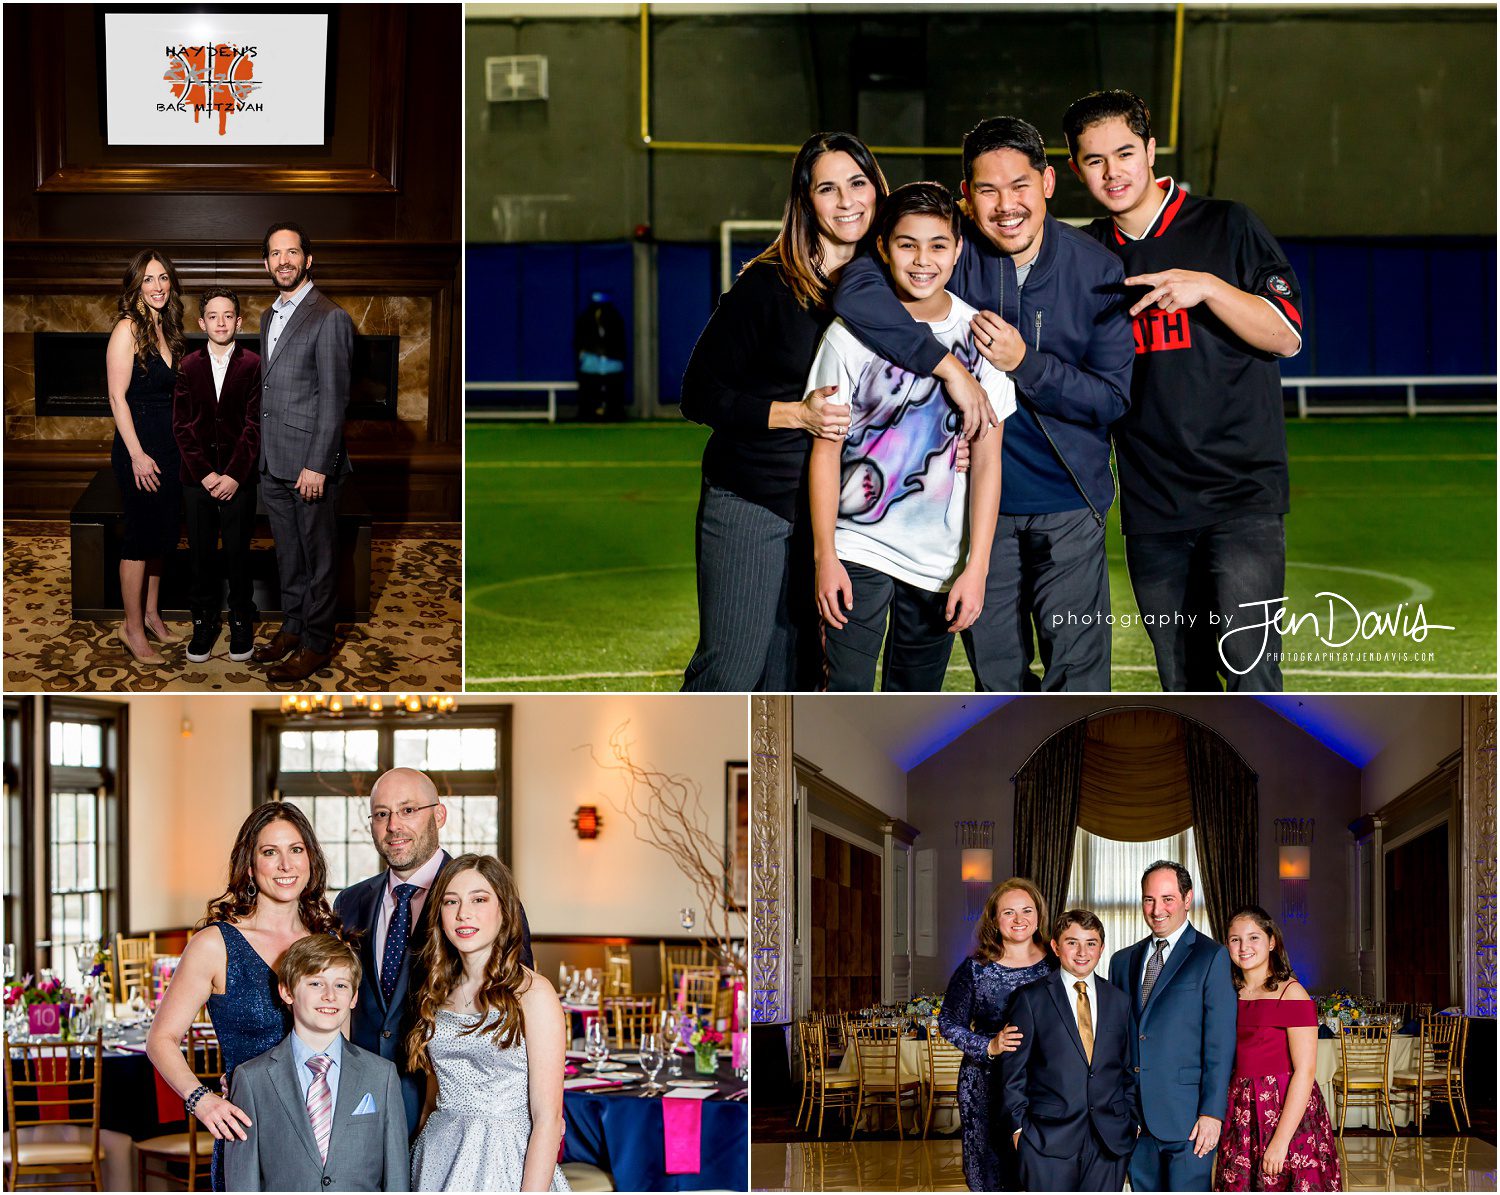 Using the reception space for family formals for bar bat mitzvah